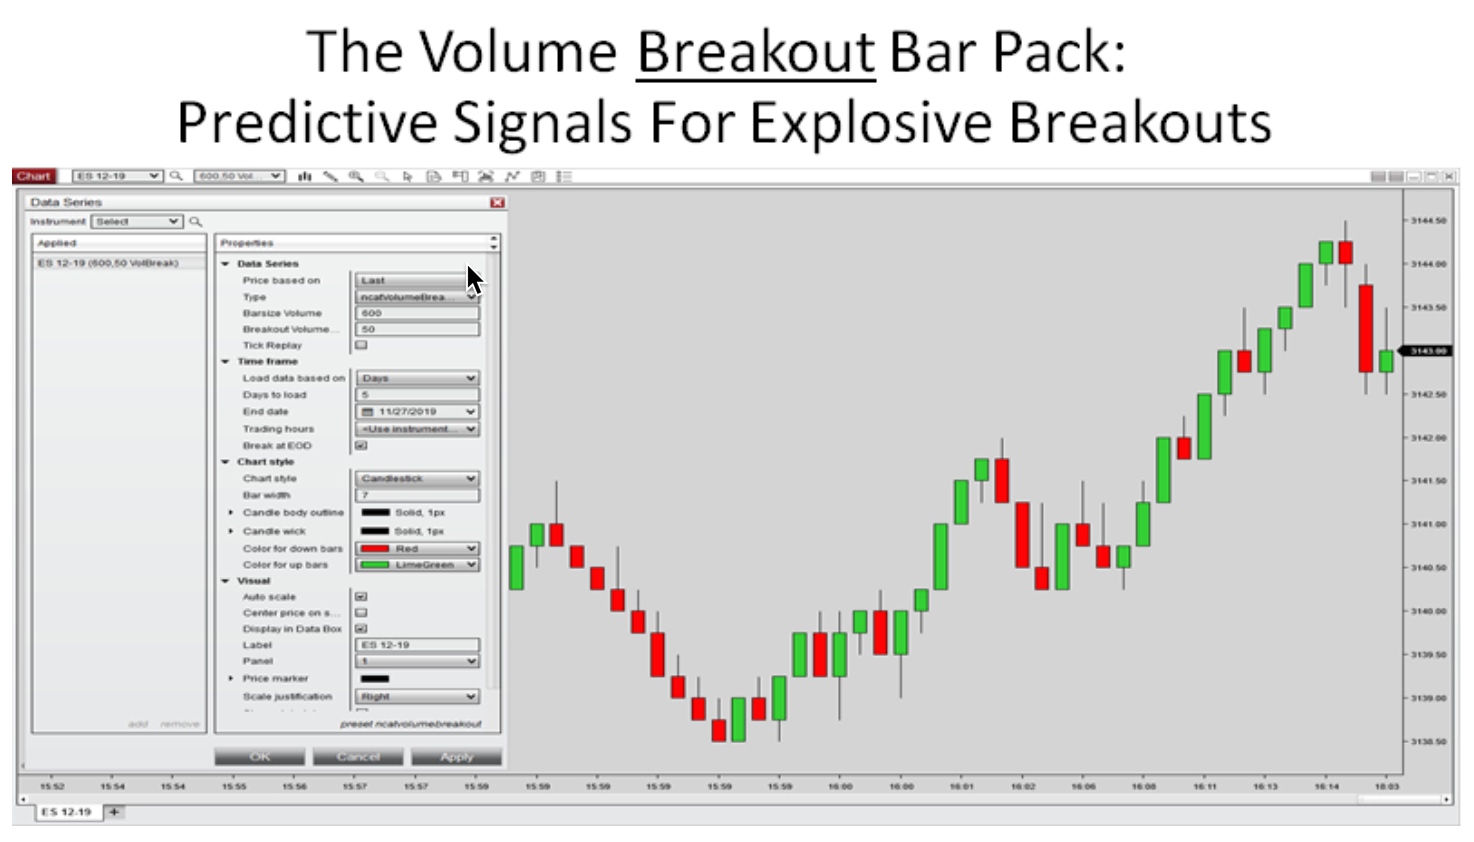 The Volume Breakout Bar Pack